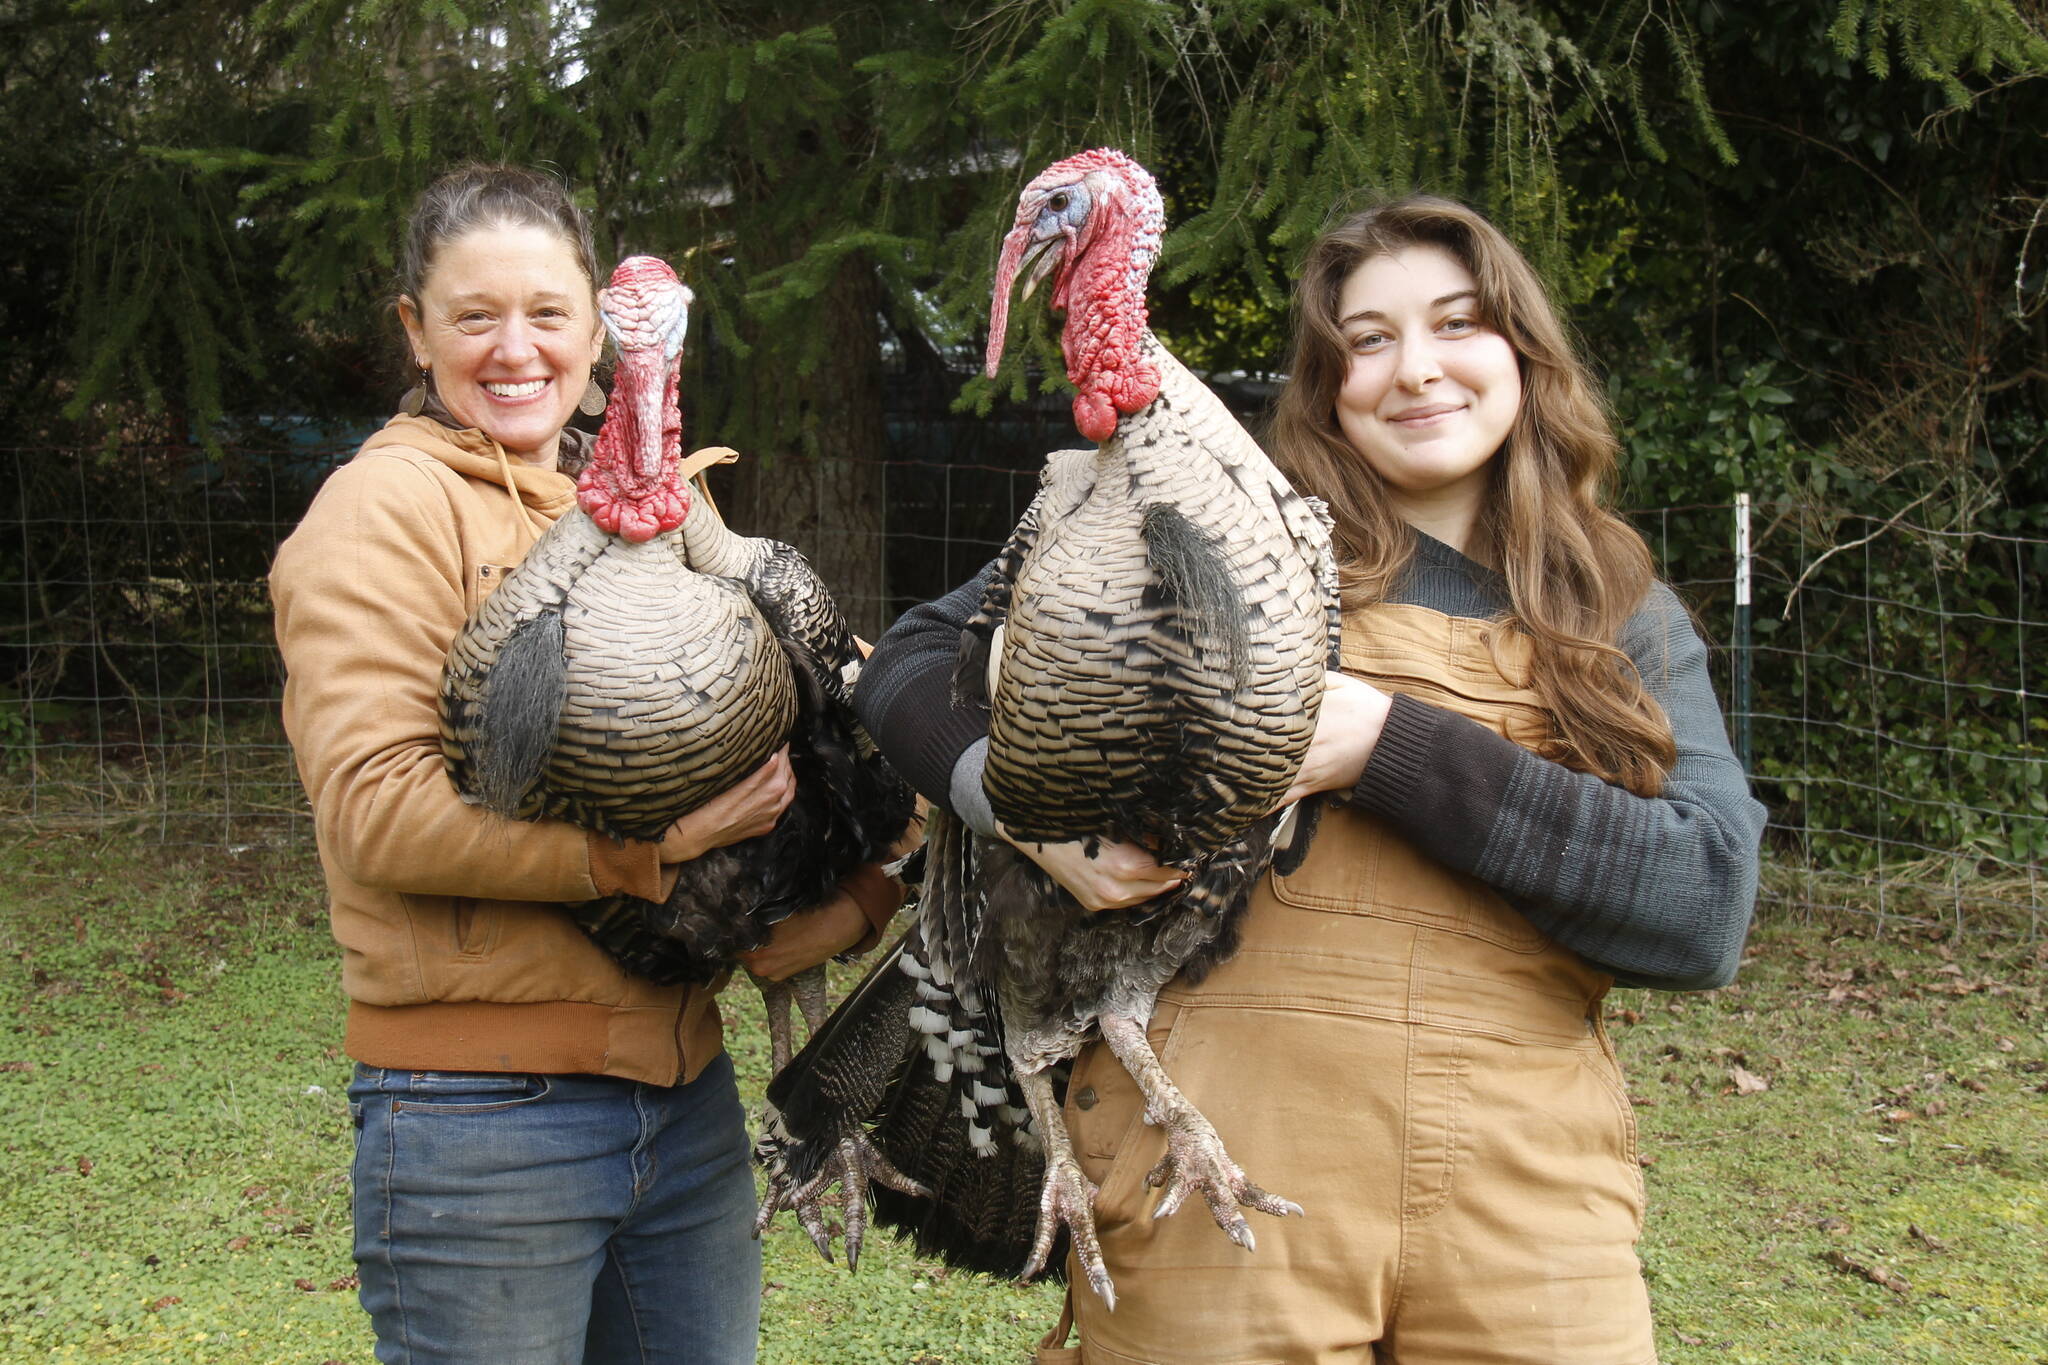 Jenny Goff, left, and Heather Talley are the farmers and creators behind “Thankful Harvest,” a children’s book about raising and harvesting turkeys. (Photo by Kira Erickson/South Whidbey Record)